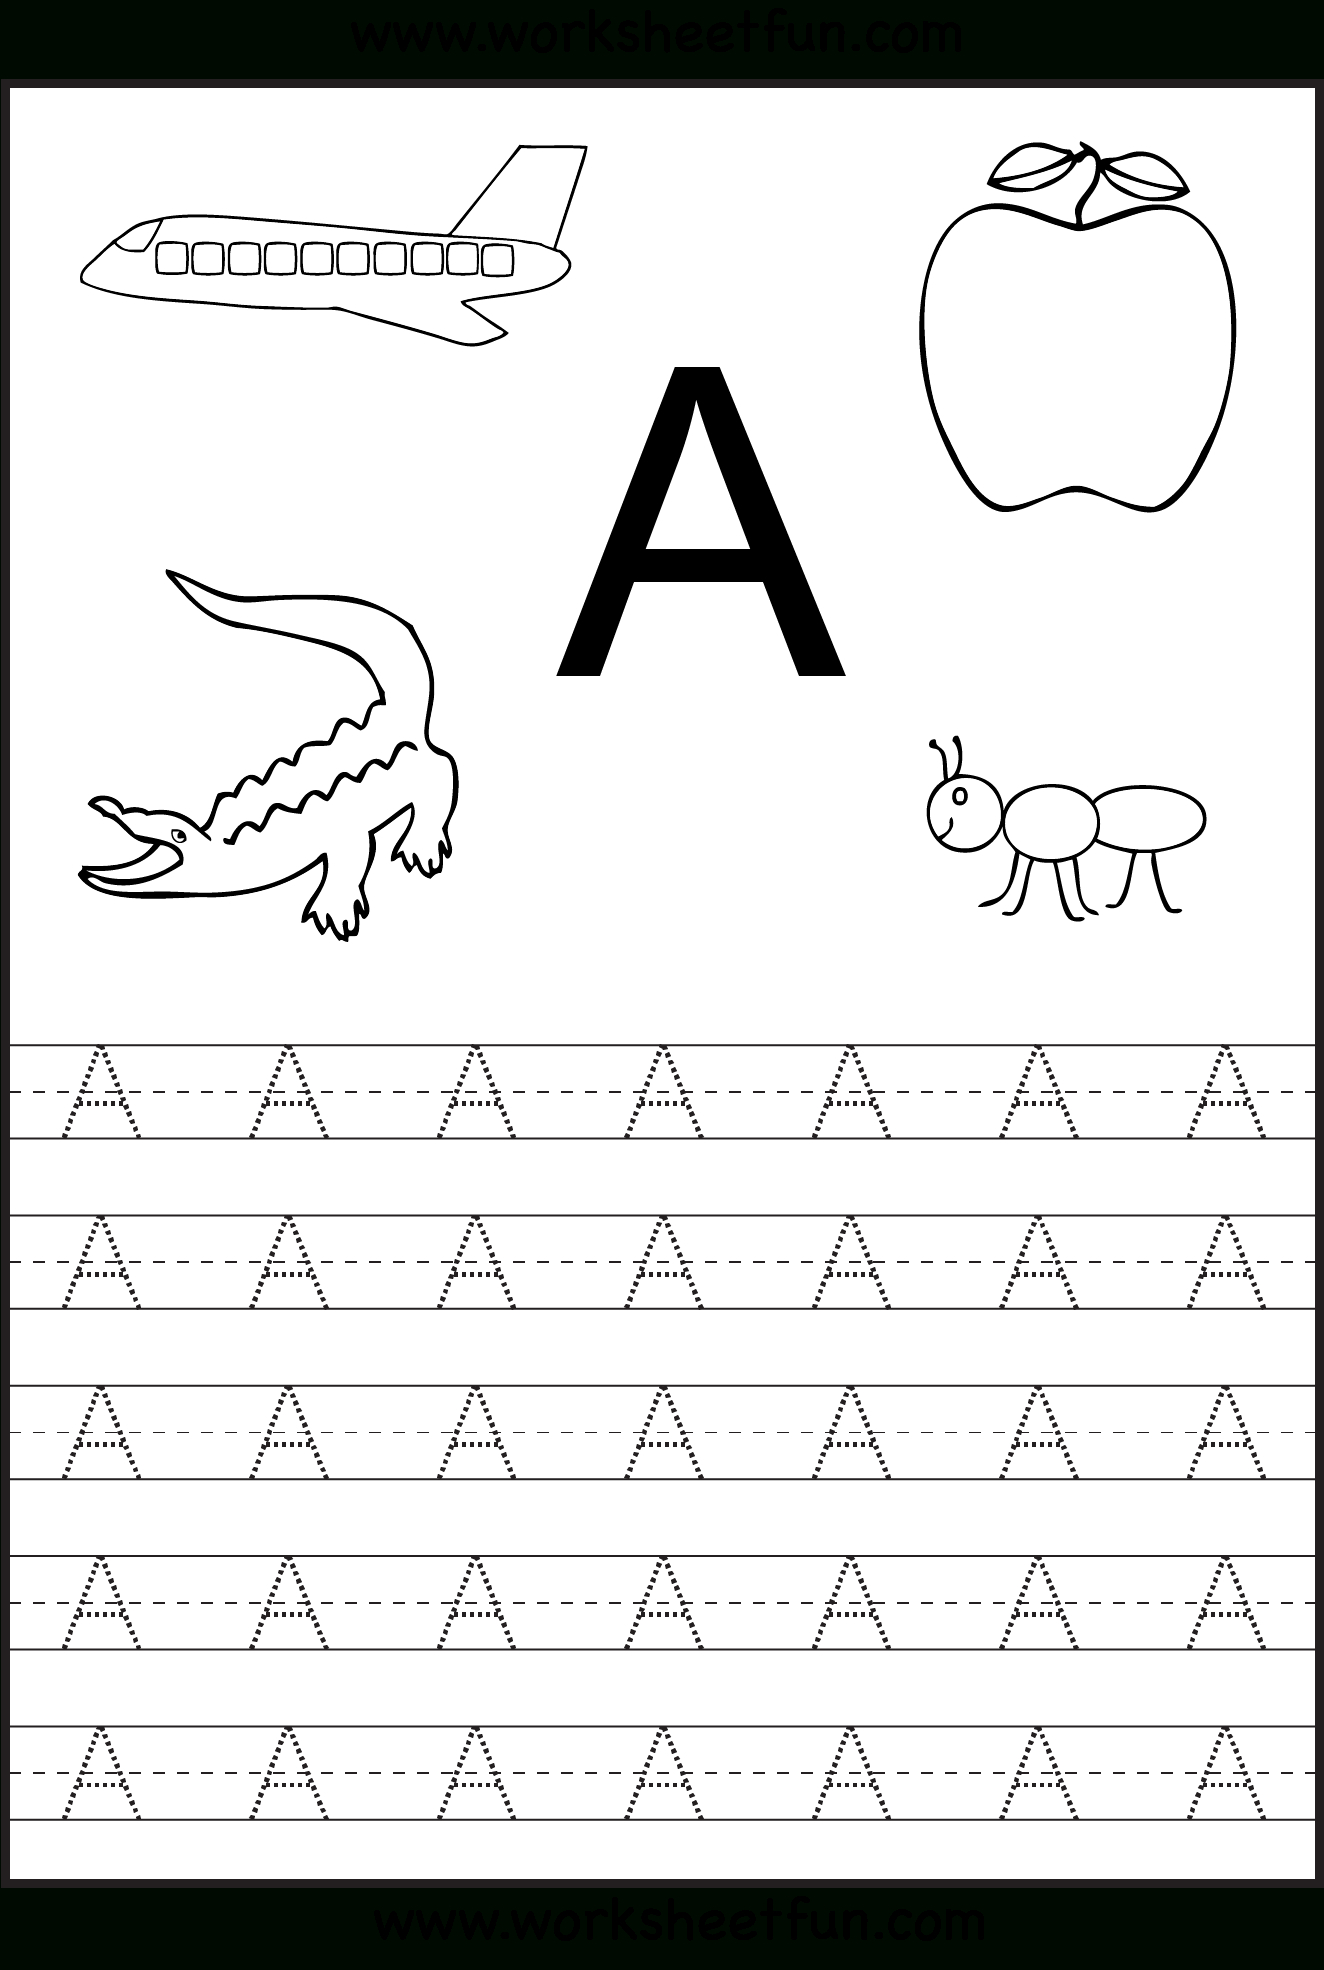 Free Printable Worksheets: Letter Tracing Worksheets For throughout Letter Tracing Worksheets Pdf Free